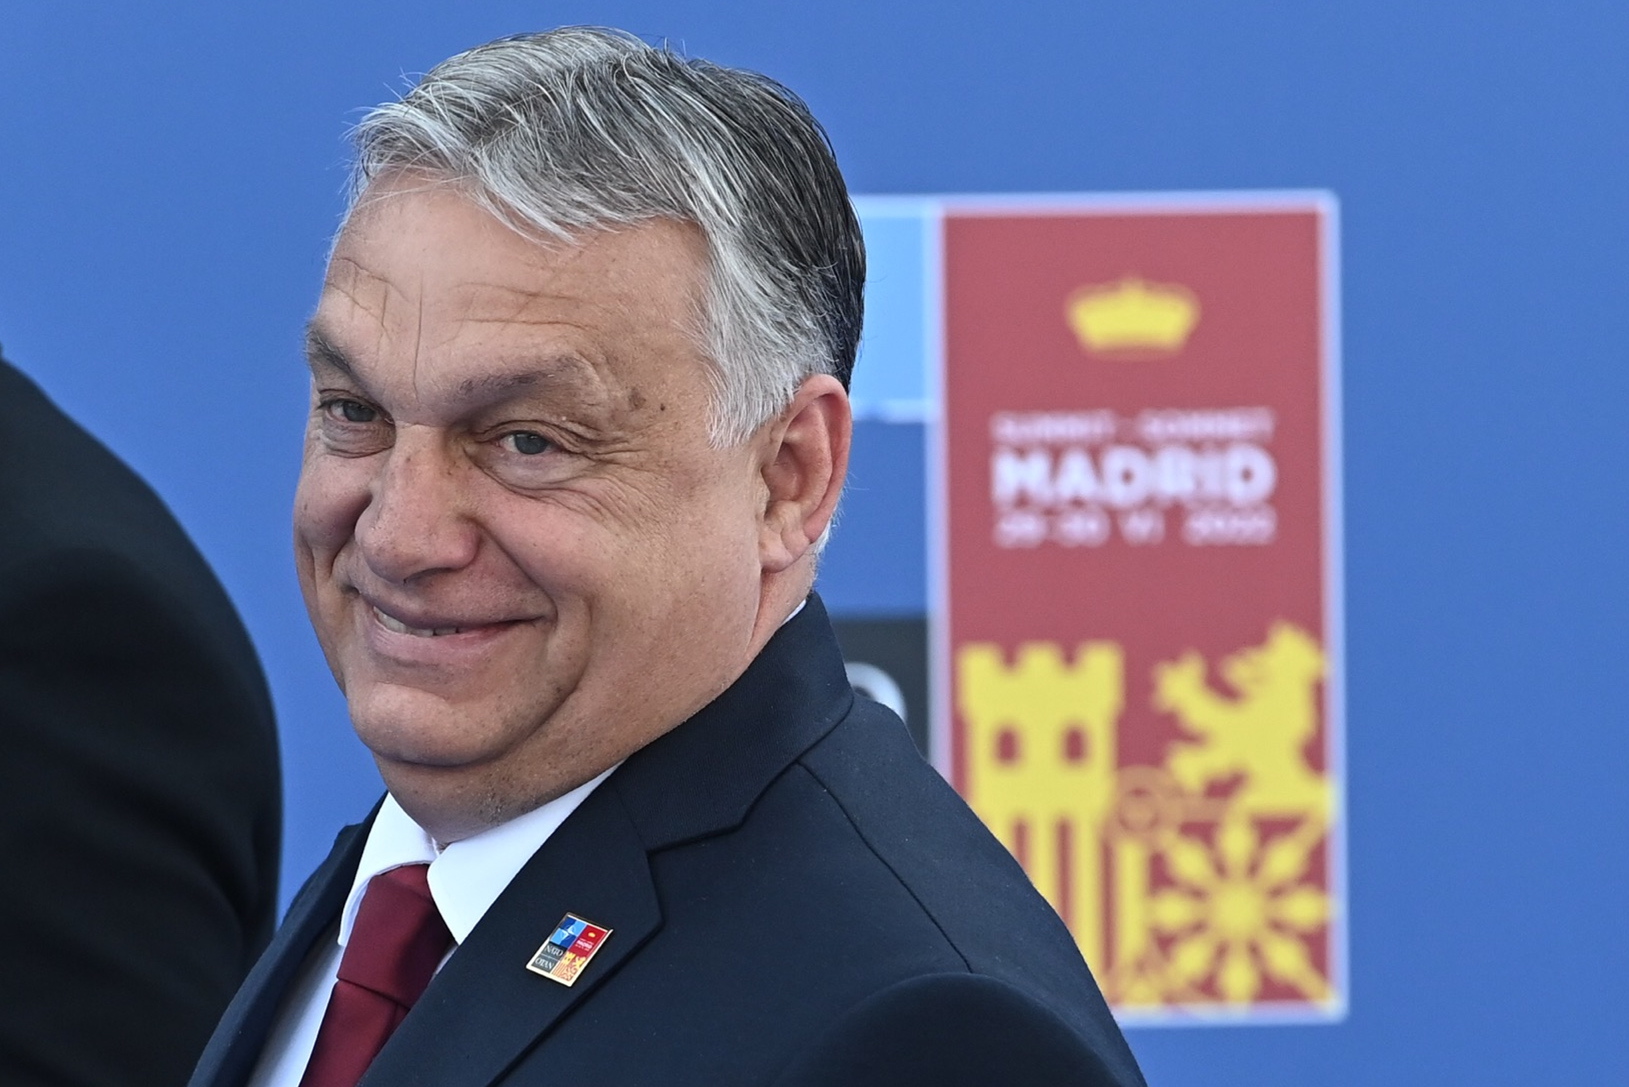 epa10040261 Hungarian Prime Minister, Viktor Orban, arrives to attend the first day of the NATO Summit at IFEMA Convention Center, in Madrid, Spain, 29 June 2022. Some 40 world leaders are to attend the summit, running from 29 to 30 June, focused on the ongoing Russian invasion of Ukraine. Spain hosts the event to mark the 40th anniversary of its accession to NATO.  EPA/Fernando Villar